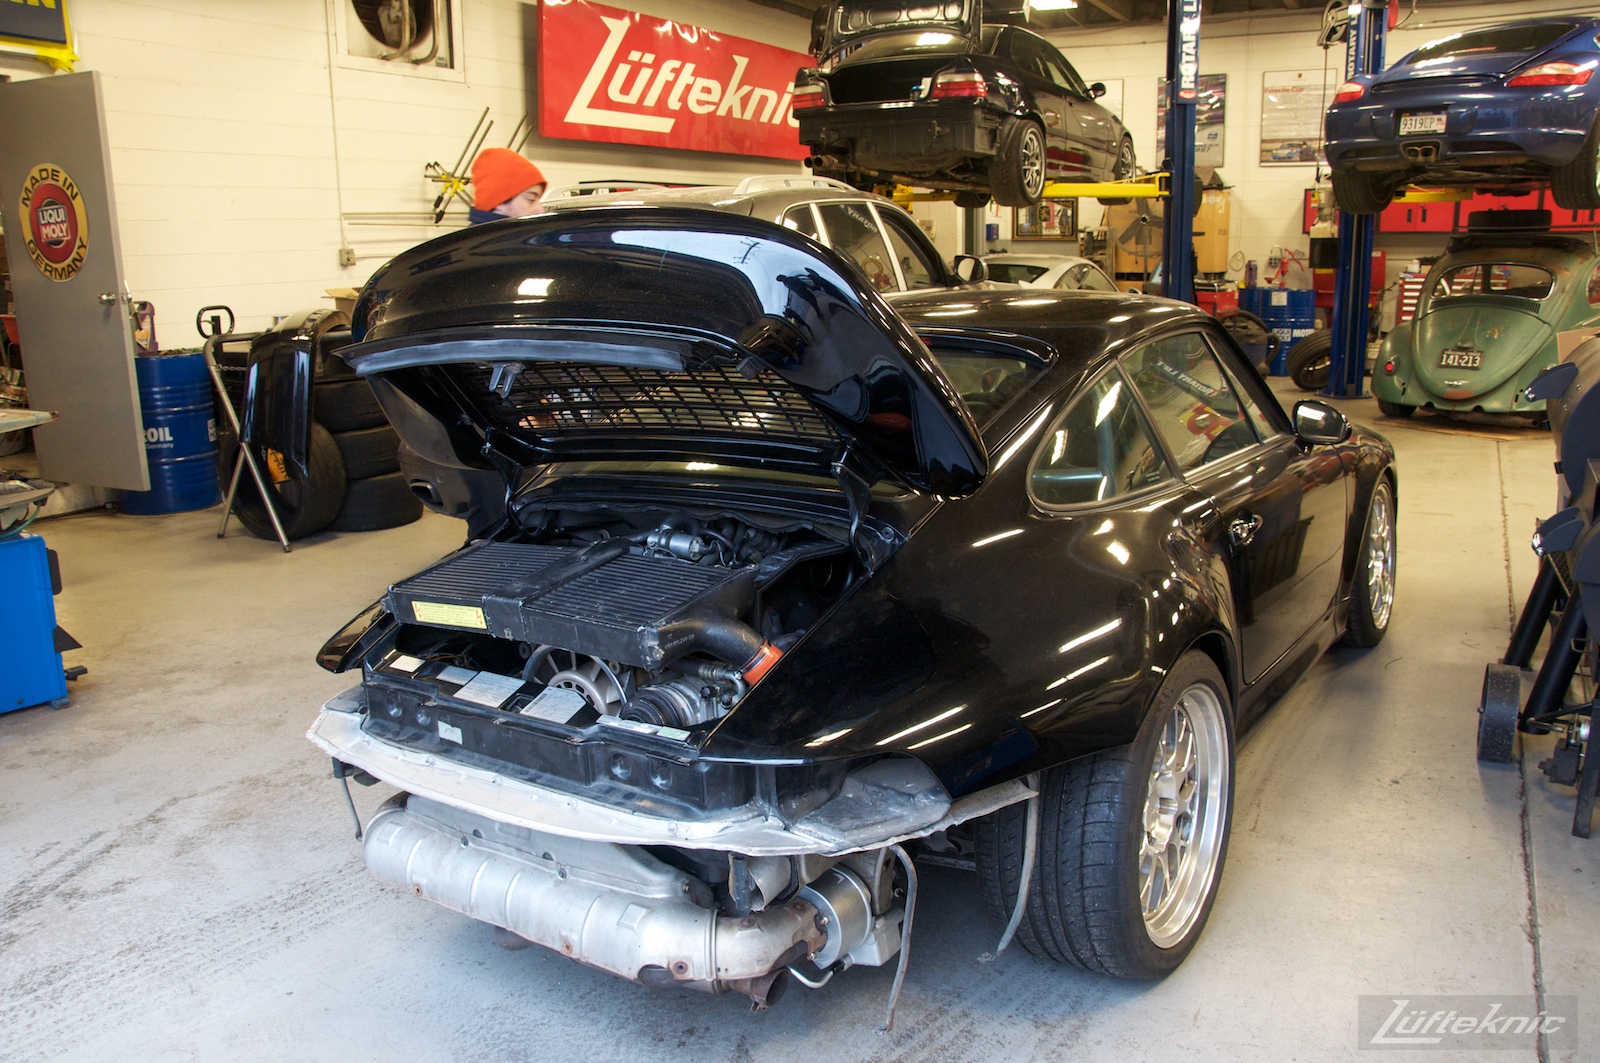 993 Turbo with no rear bumper sitting staged inside the Lufteknic shop with other cars inside the shop.